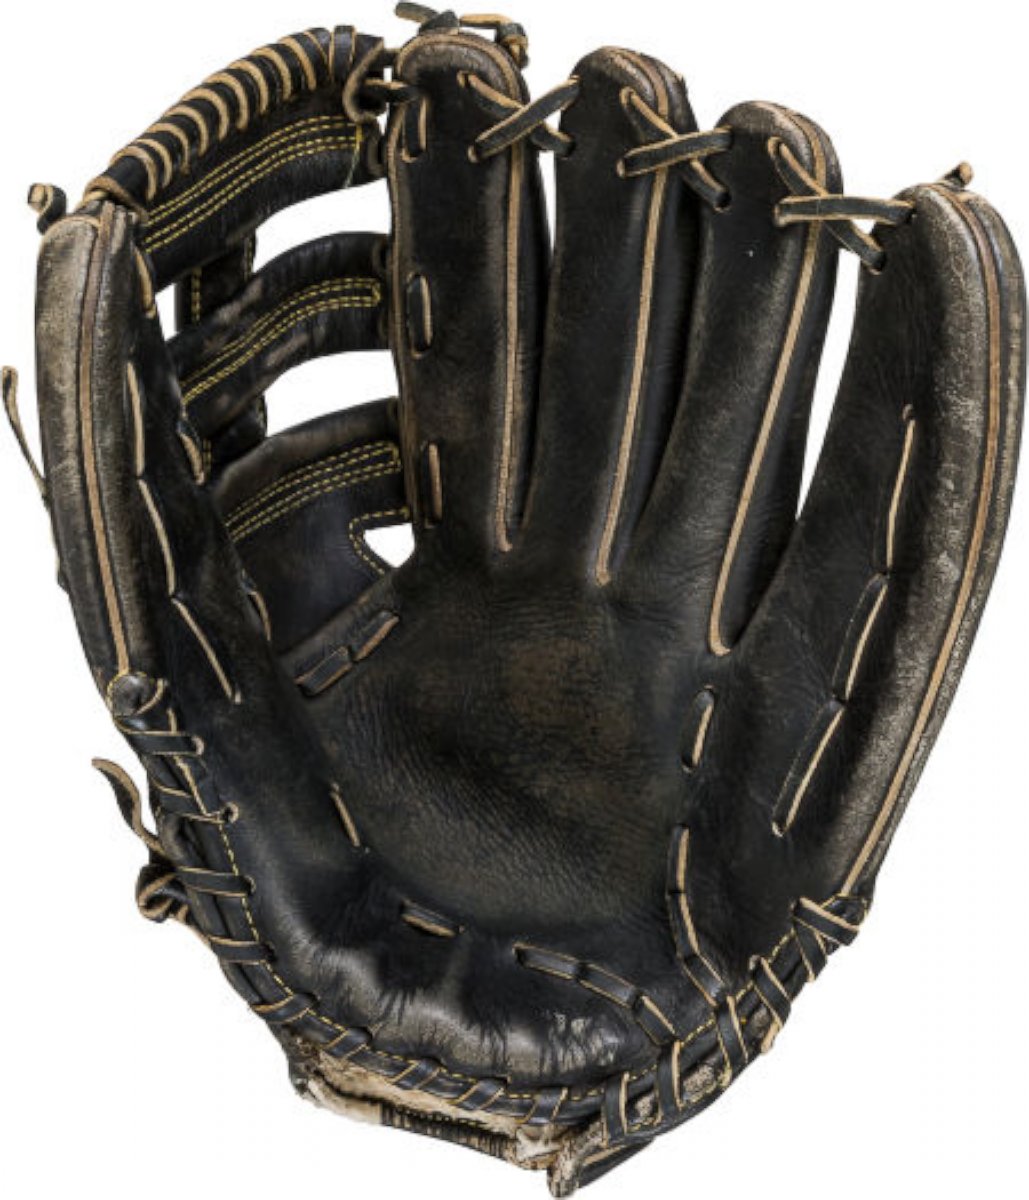 PHOTO: The glove worn by fan Jeffrey Maier during a 1996 playoff game between the New York Yankees and Baltimore Orioles is part of a sale through Heritage Auctions.